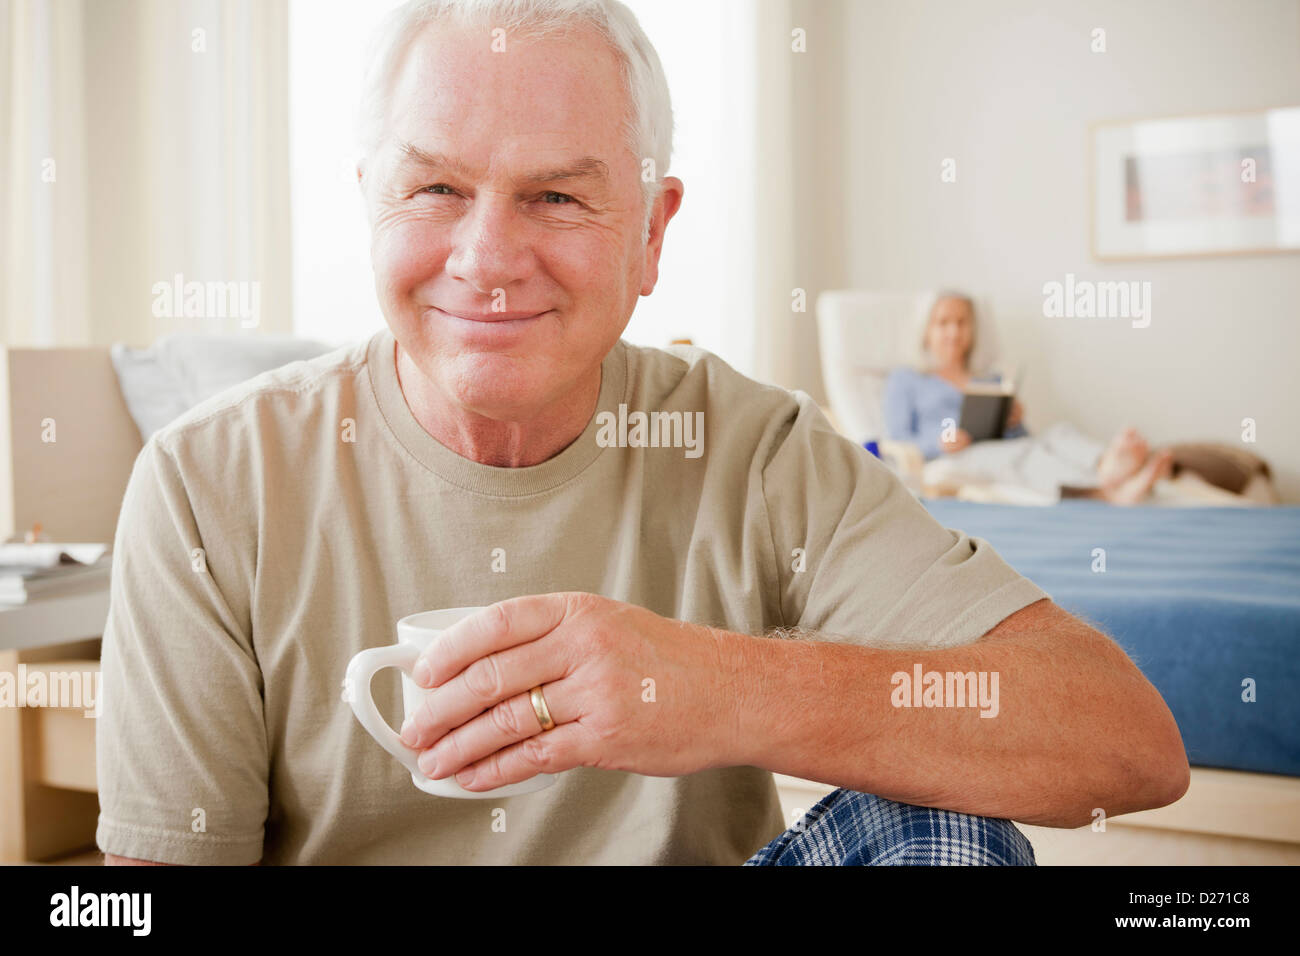 Senior man holding Coffee cup and smiling Banque D'Images